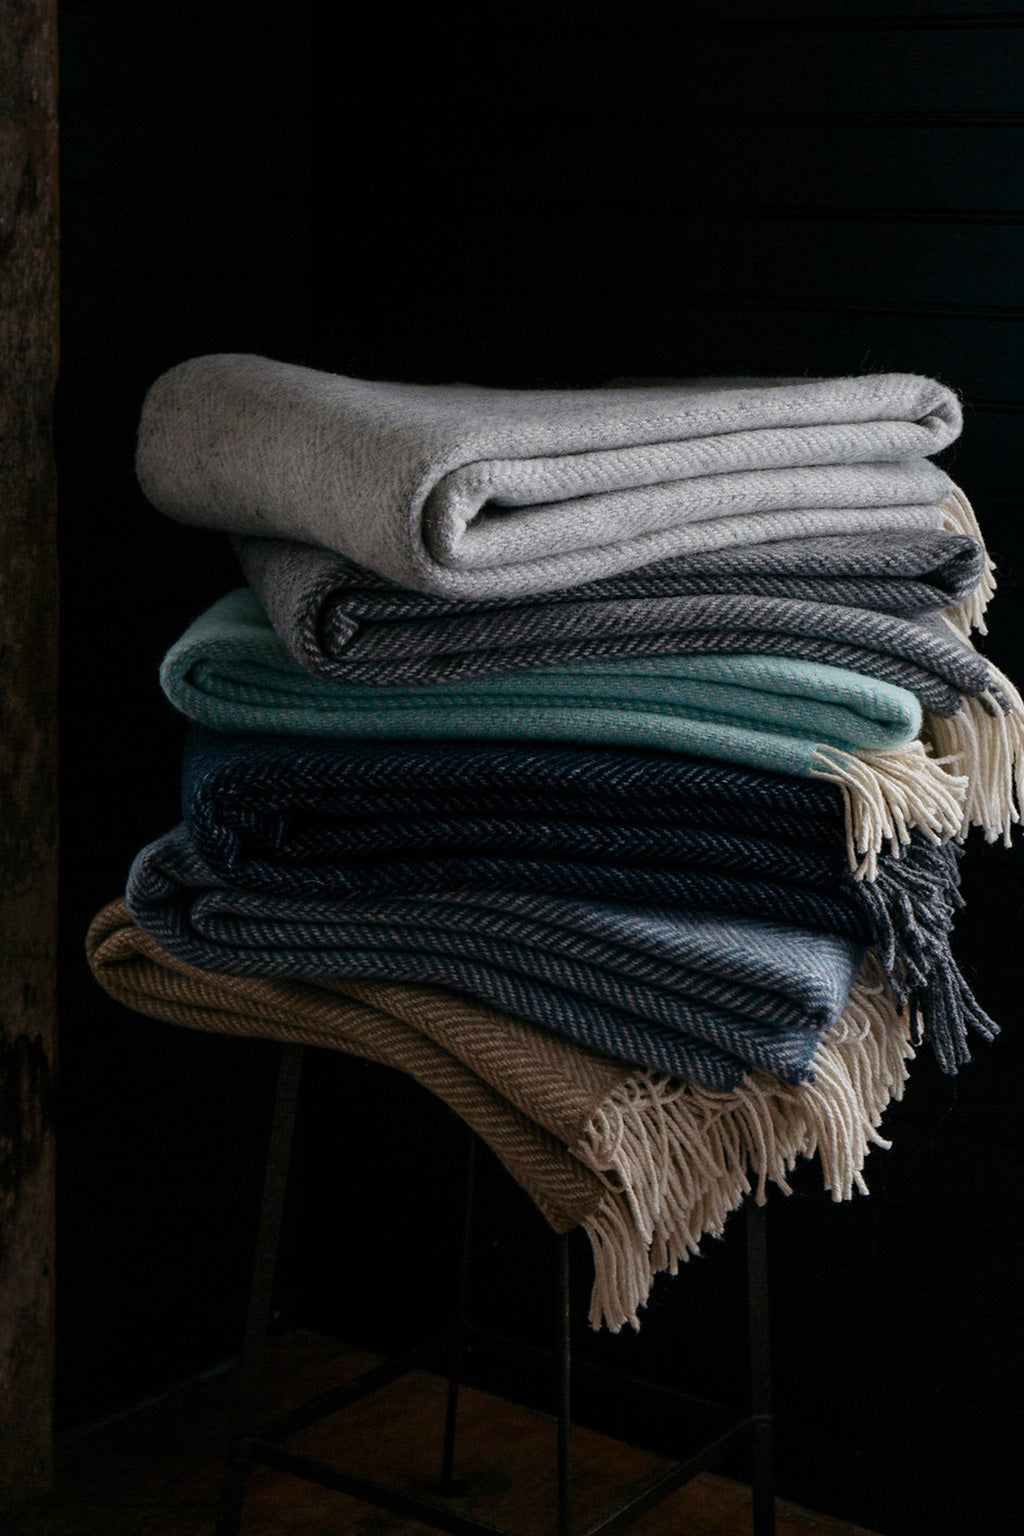 A stack of folded Merino Lambswool Cashmere throws. A beautiful display of Six out of 10 different colorways. Light grey fog, darker grey graphite, turquoise sea foam, deep midnight blue with a grey fringe detail, denim blue twilight and finally our beige colored harvest color herringbone throw.